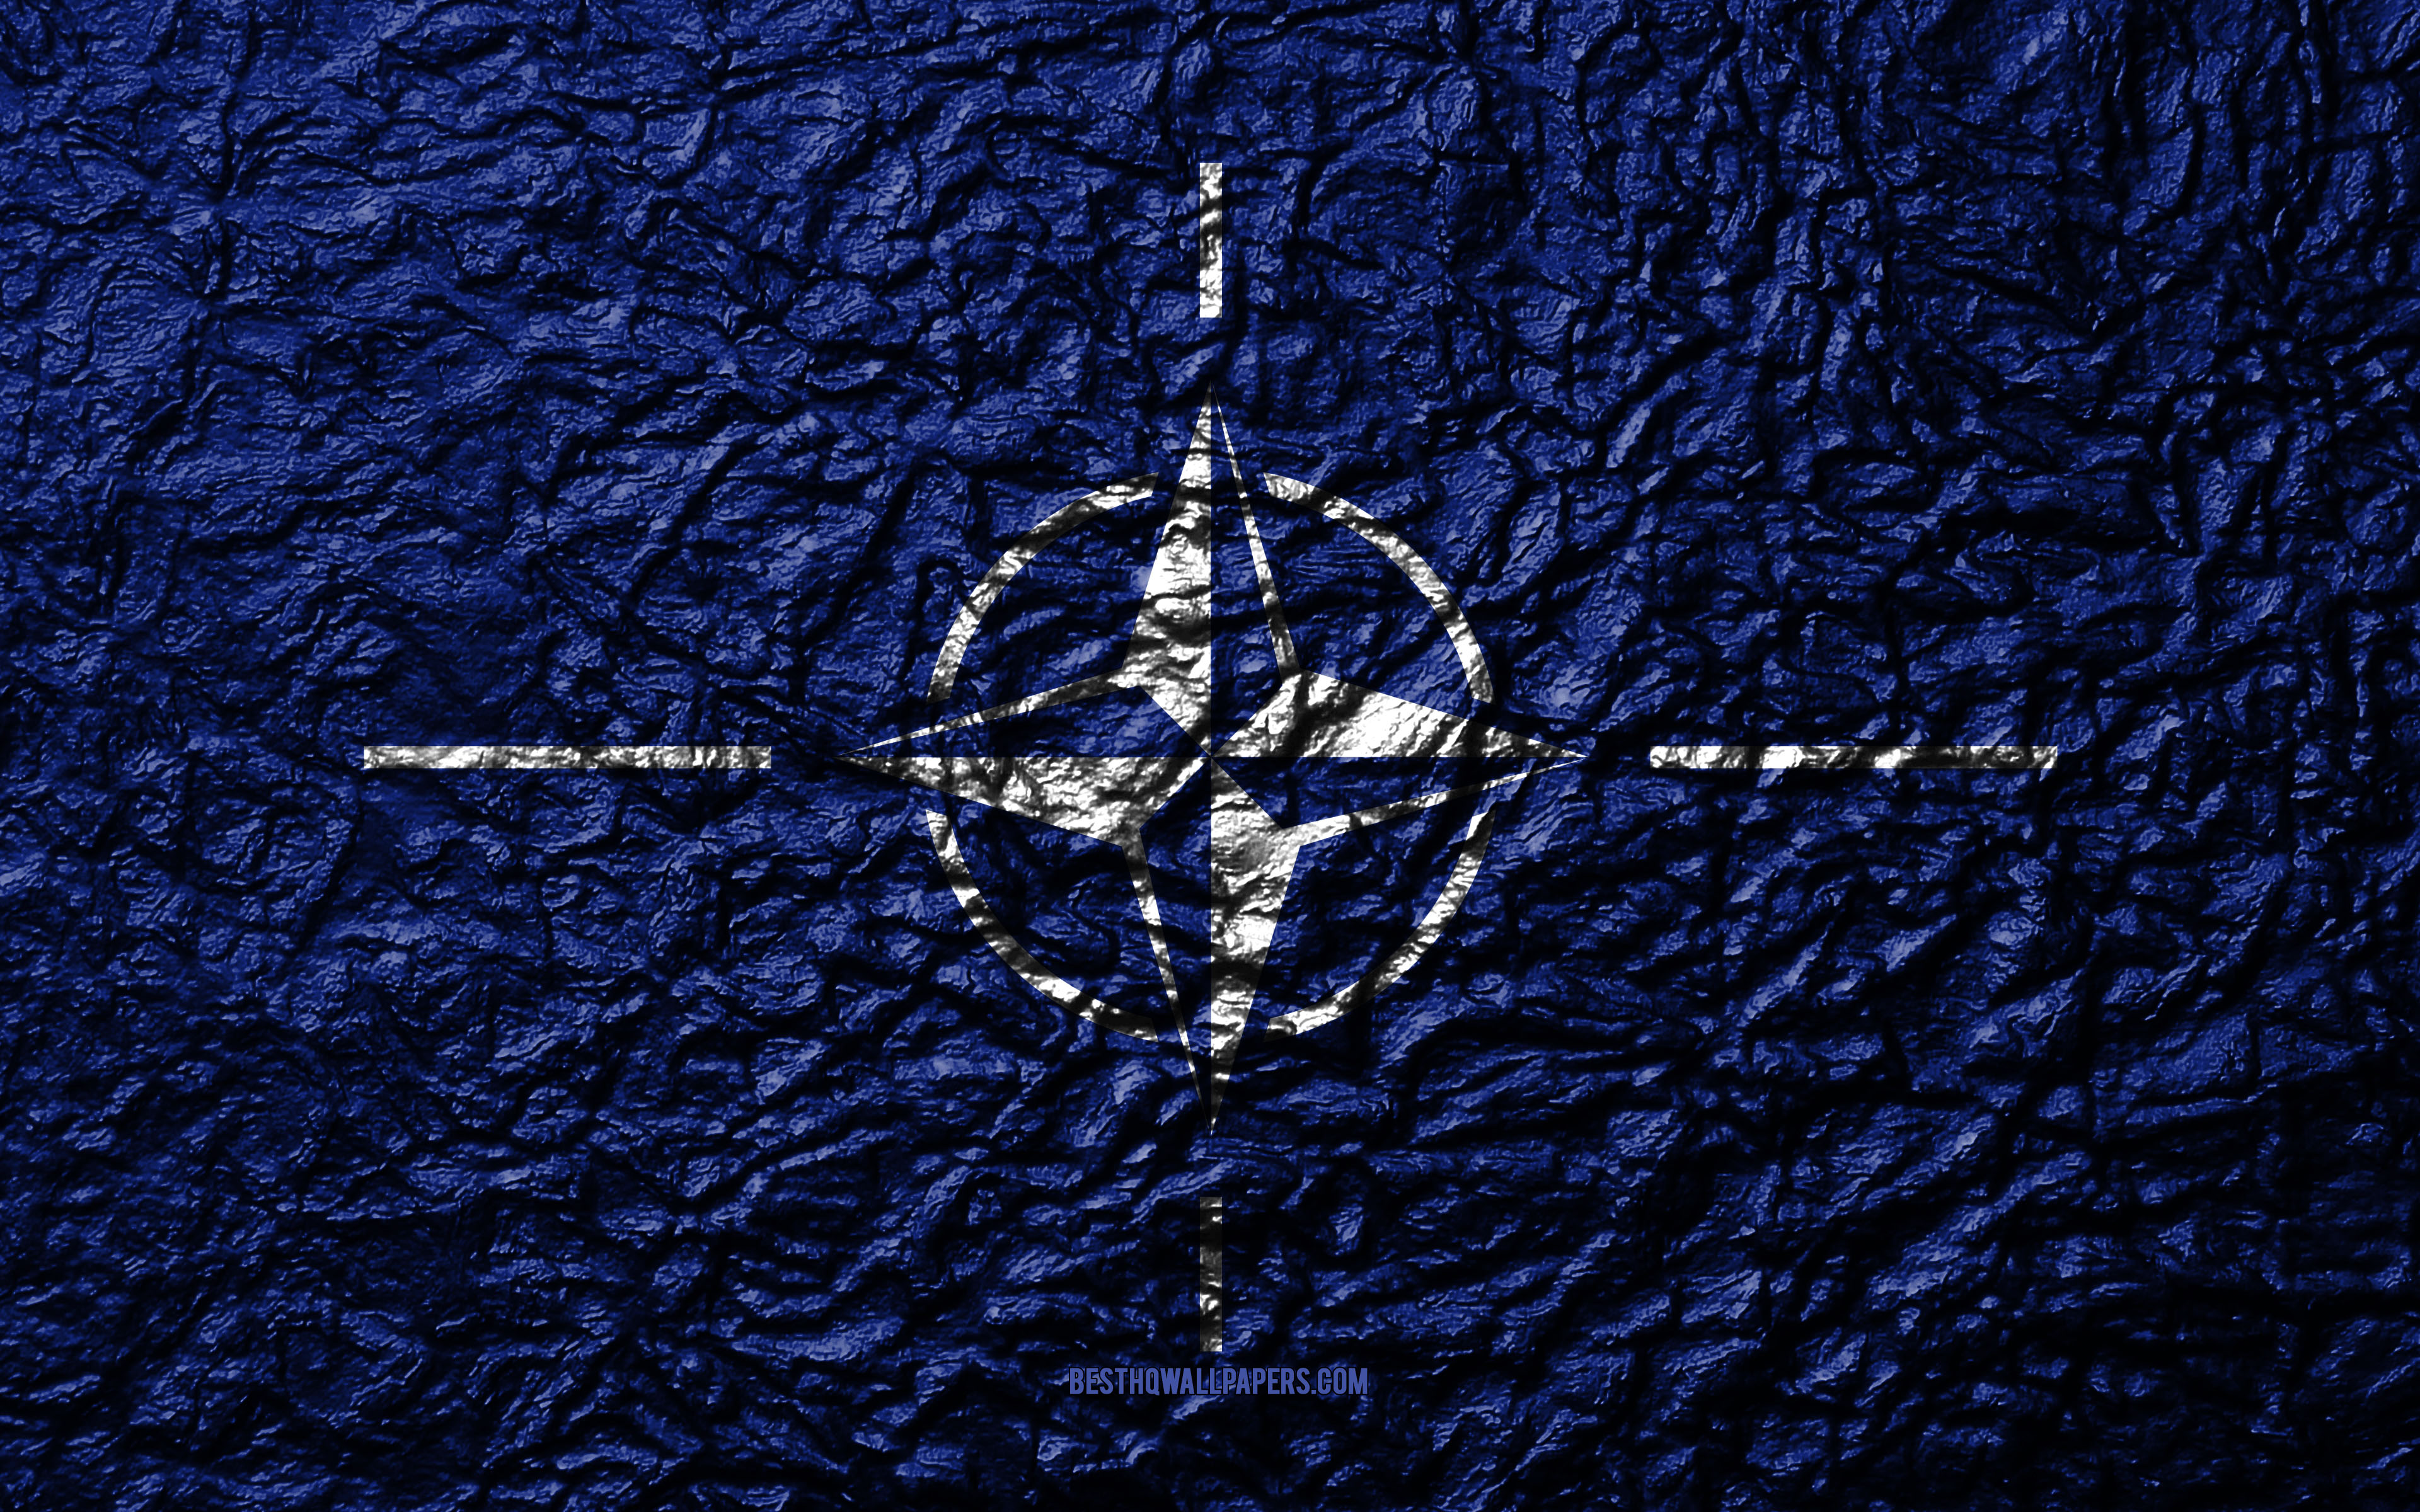 Download wallpaper Flag of NATO, 4k, stone texture, waves texture, international organization, NATO flag, North Atlantic Treaty Organization for desktop with resolution 3840x2400. High Quality HD picture wallpaper